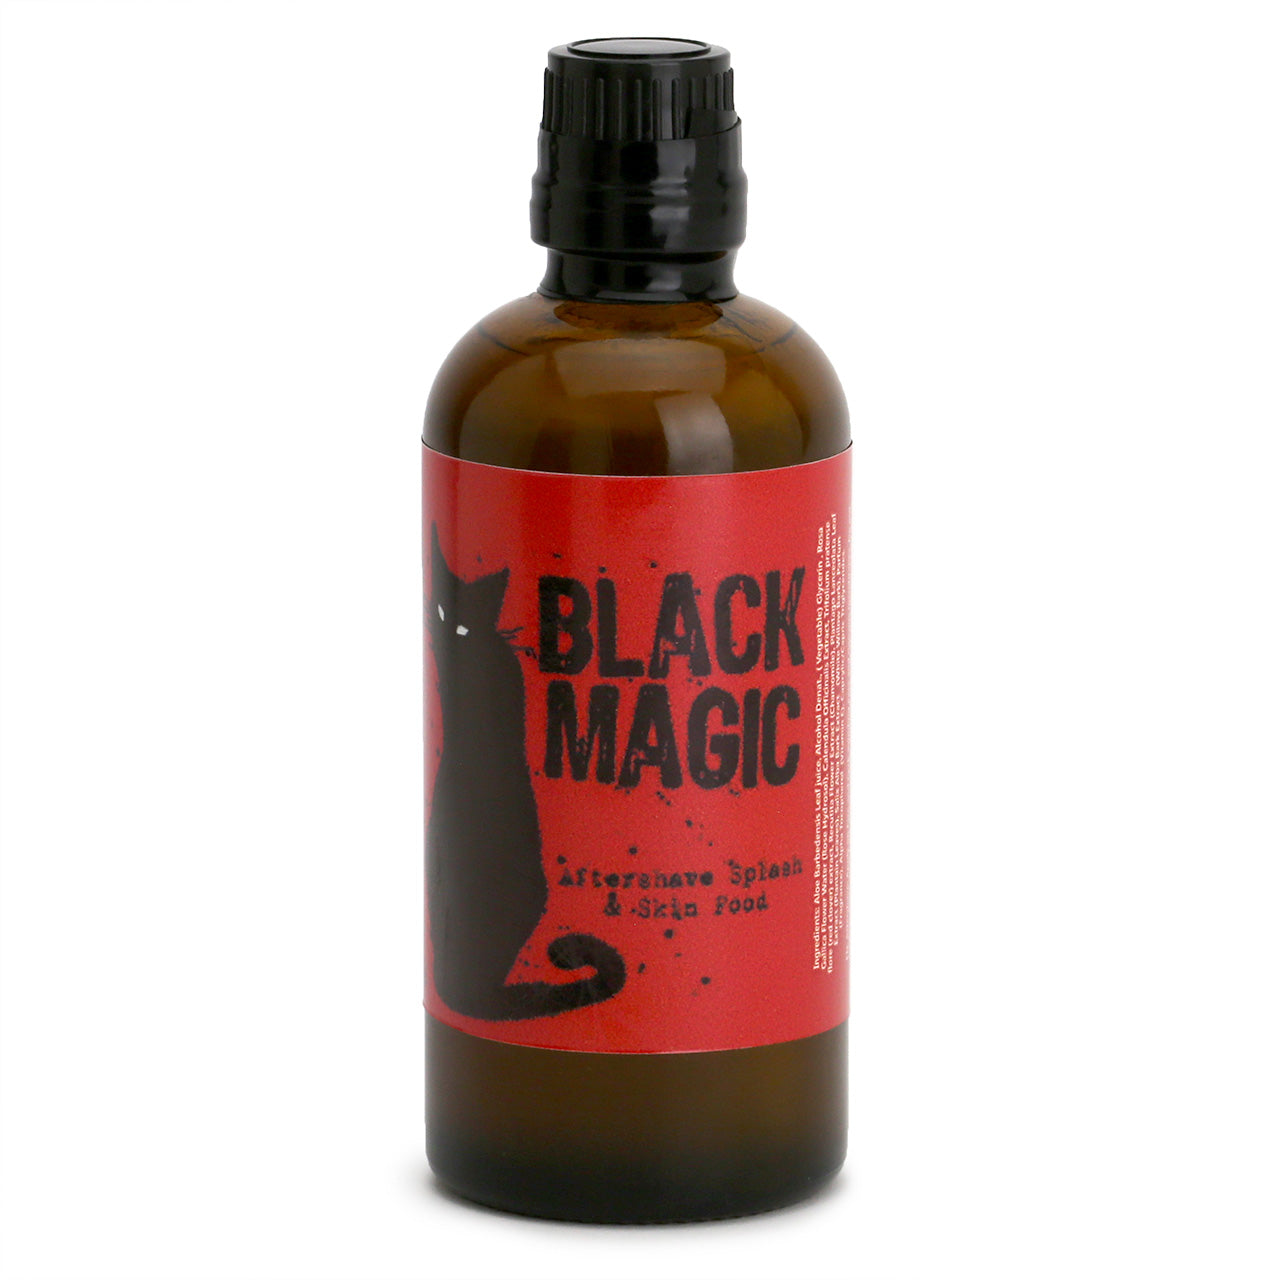 Ariana & Evans Black Magic After Shave Splash & Skin Food The Label is red with a black cat silhouette with white eyes